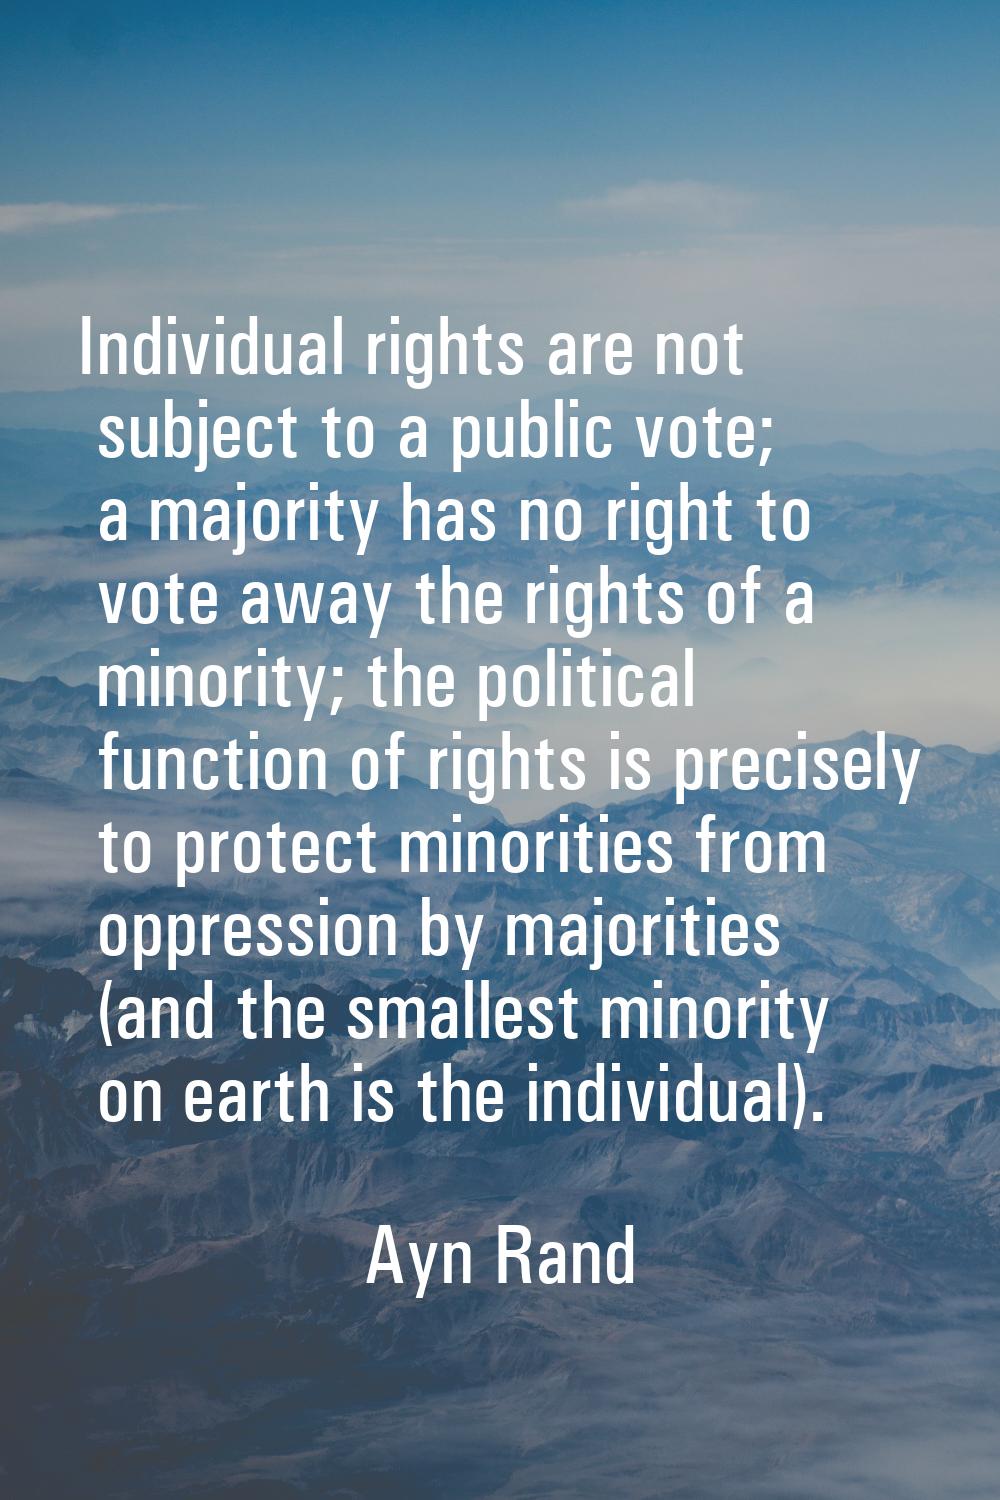 Individual rights are not subject to a public vote; a majority has no right to vote away the rights